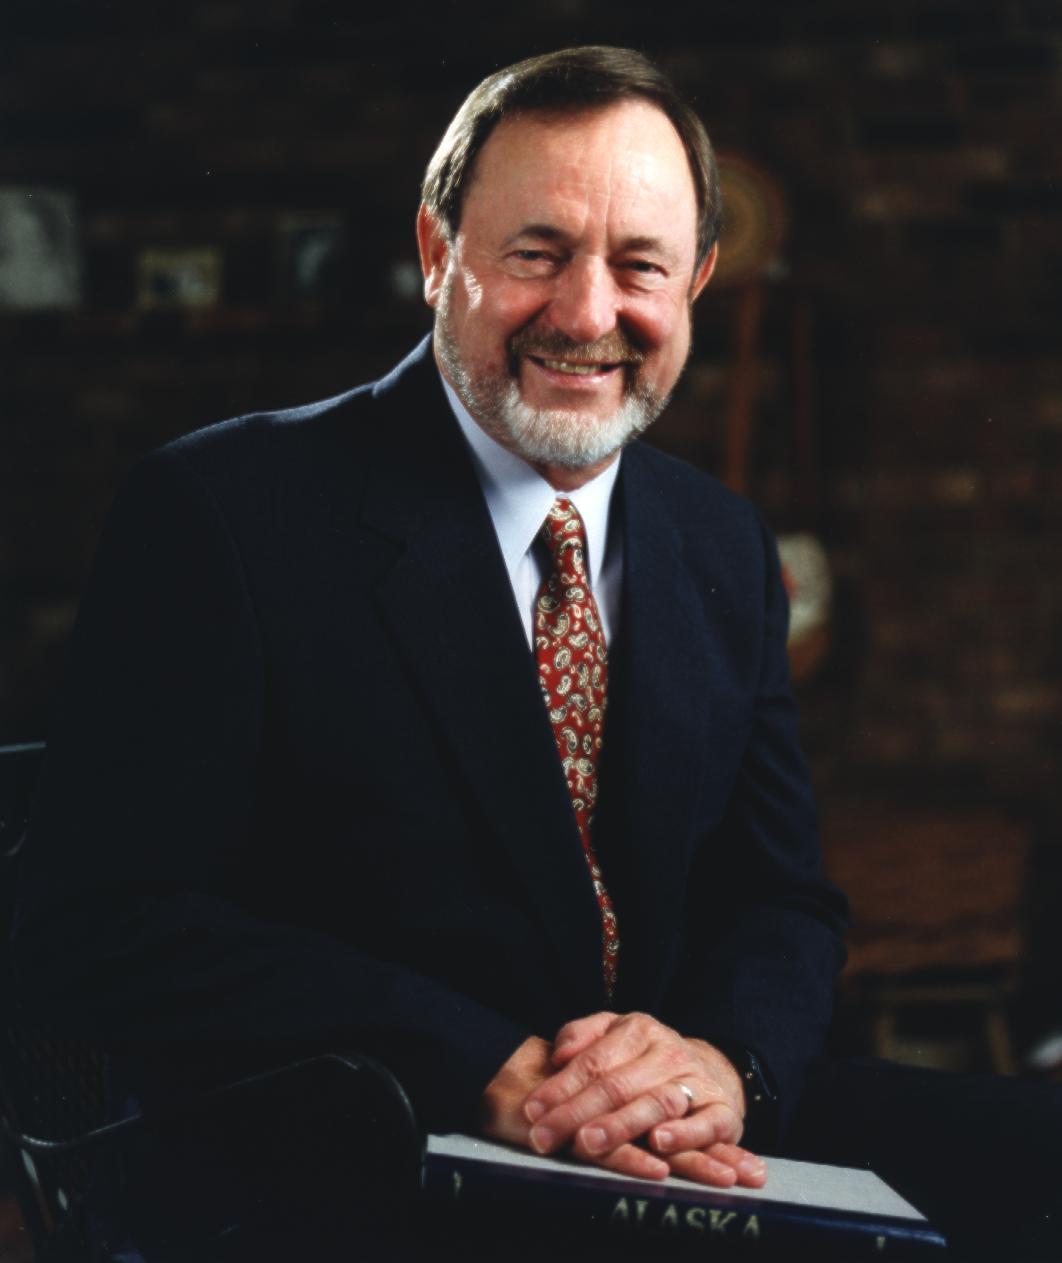 Photographic portrait of U.S. Congressman Don Young, At Large Representative for the state of Alaska to the U.S. House of Representatives